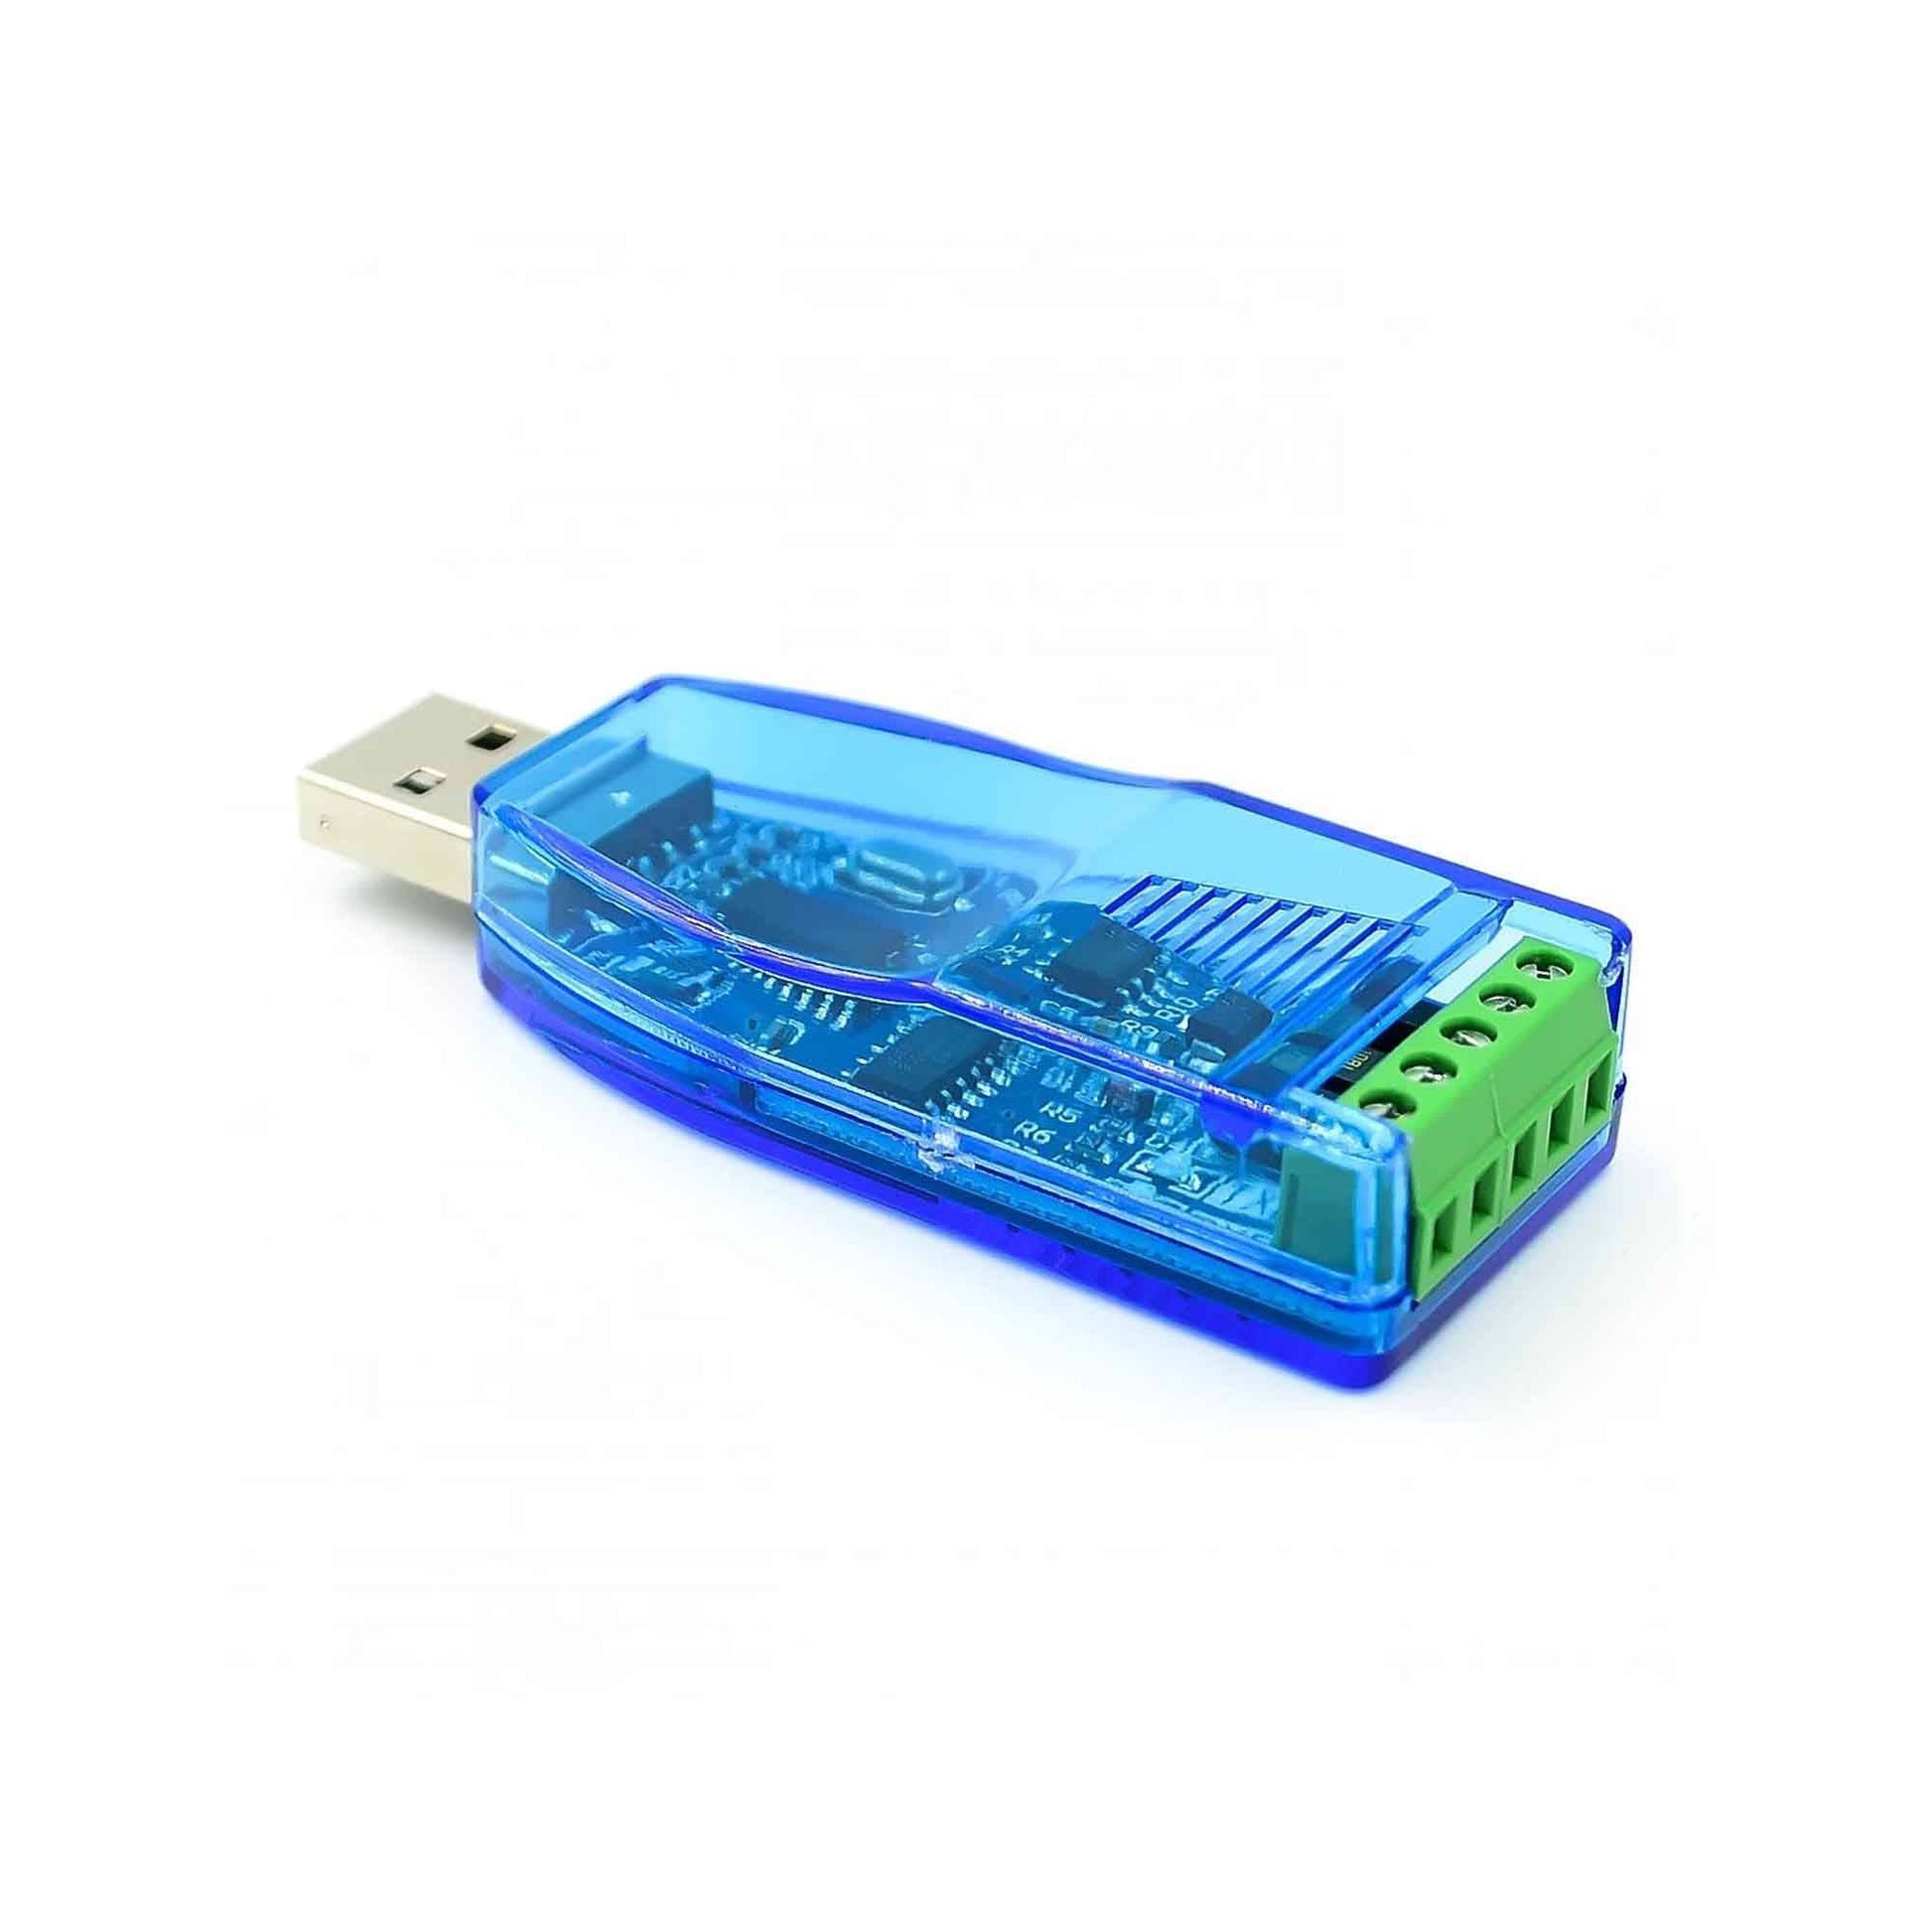 USB to RS485 Converter Adapter with CH 340/341 Chipset